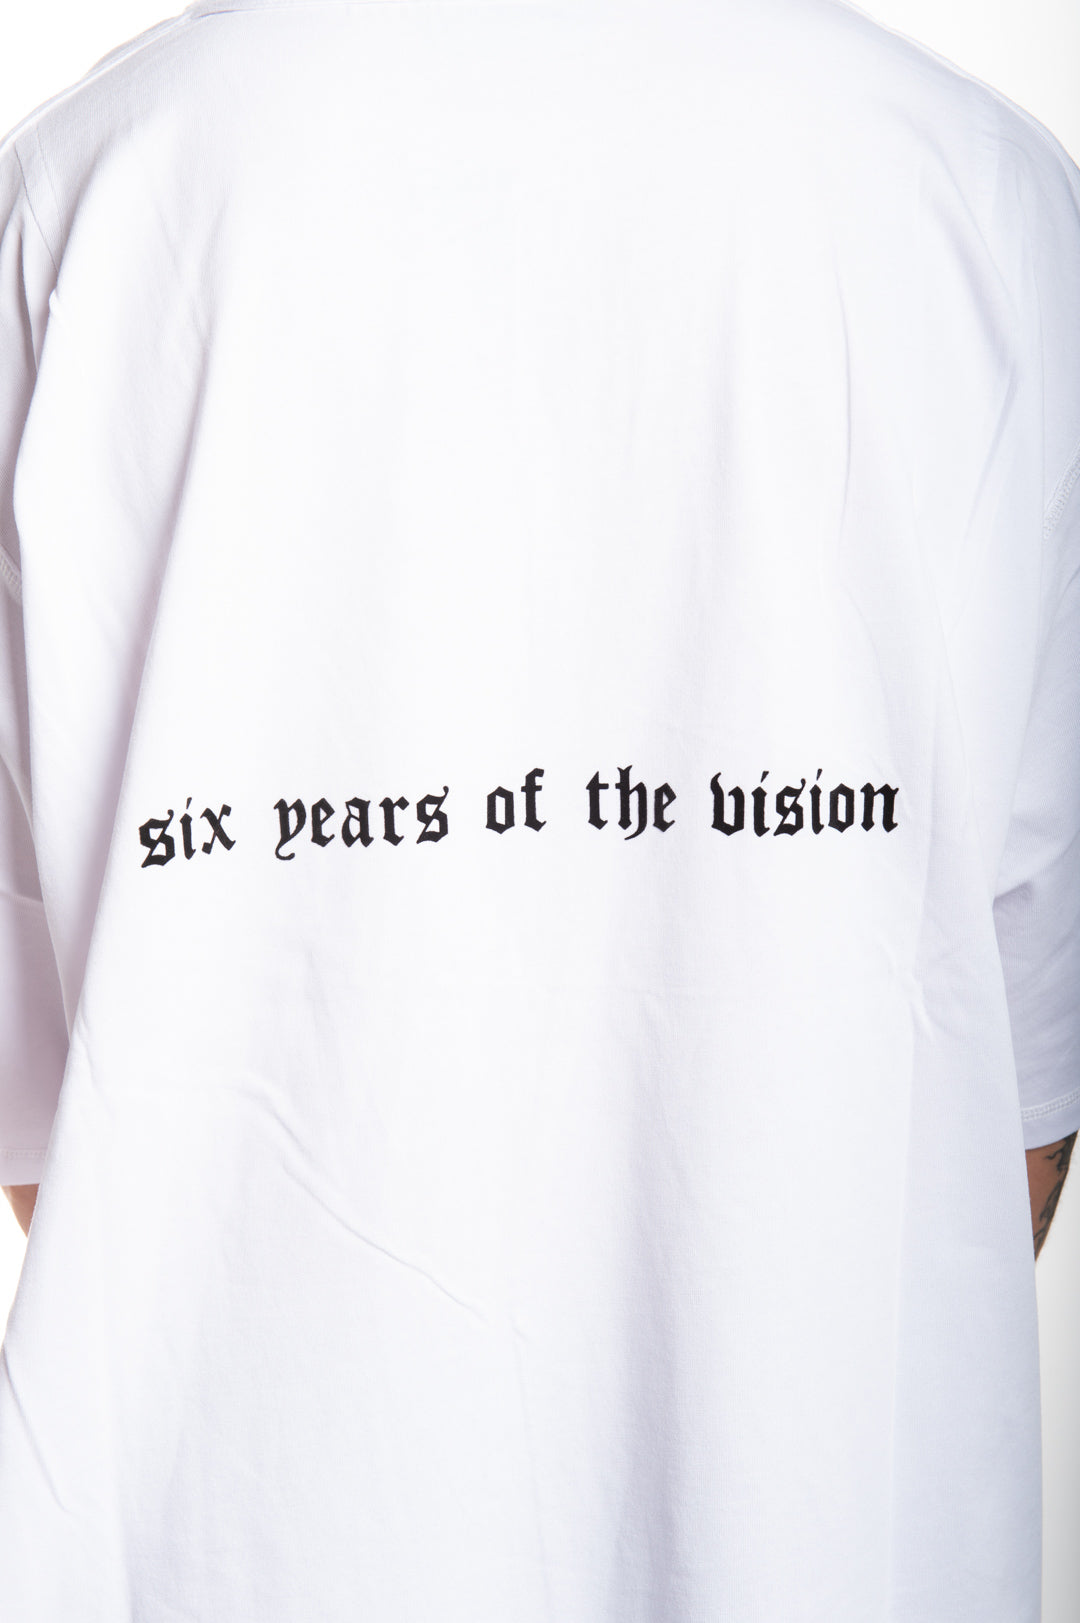 “SIX YEARS OF THE VISION” Oversized Shirt